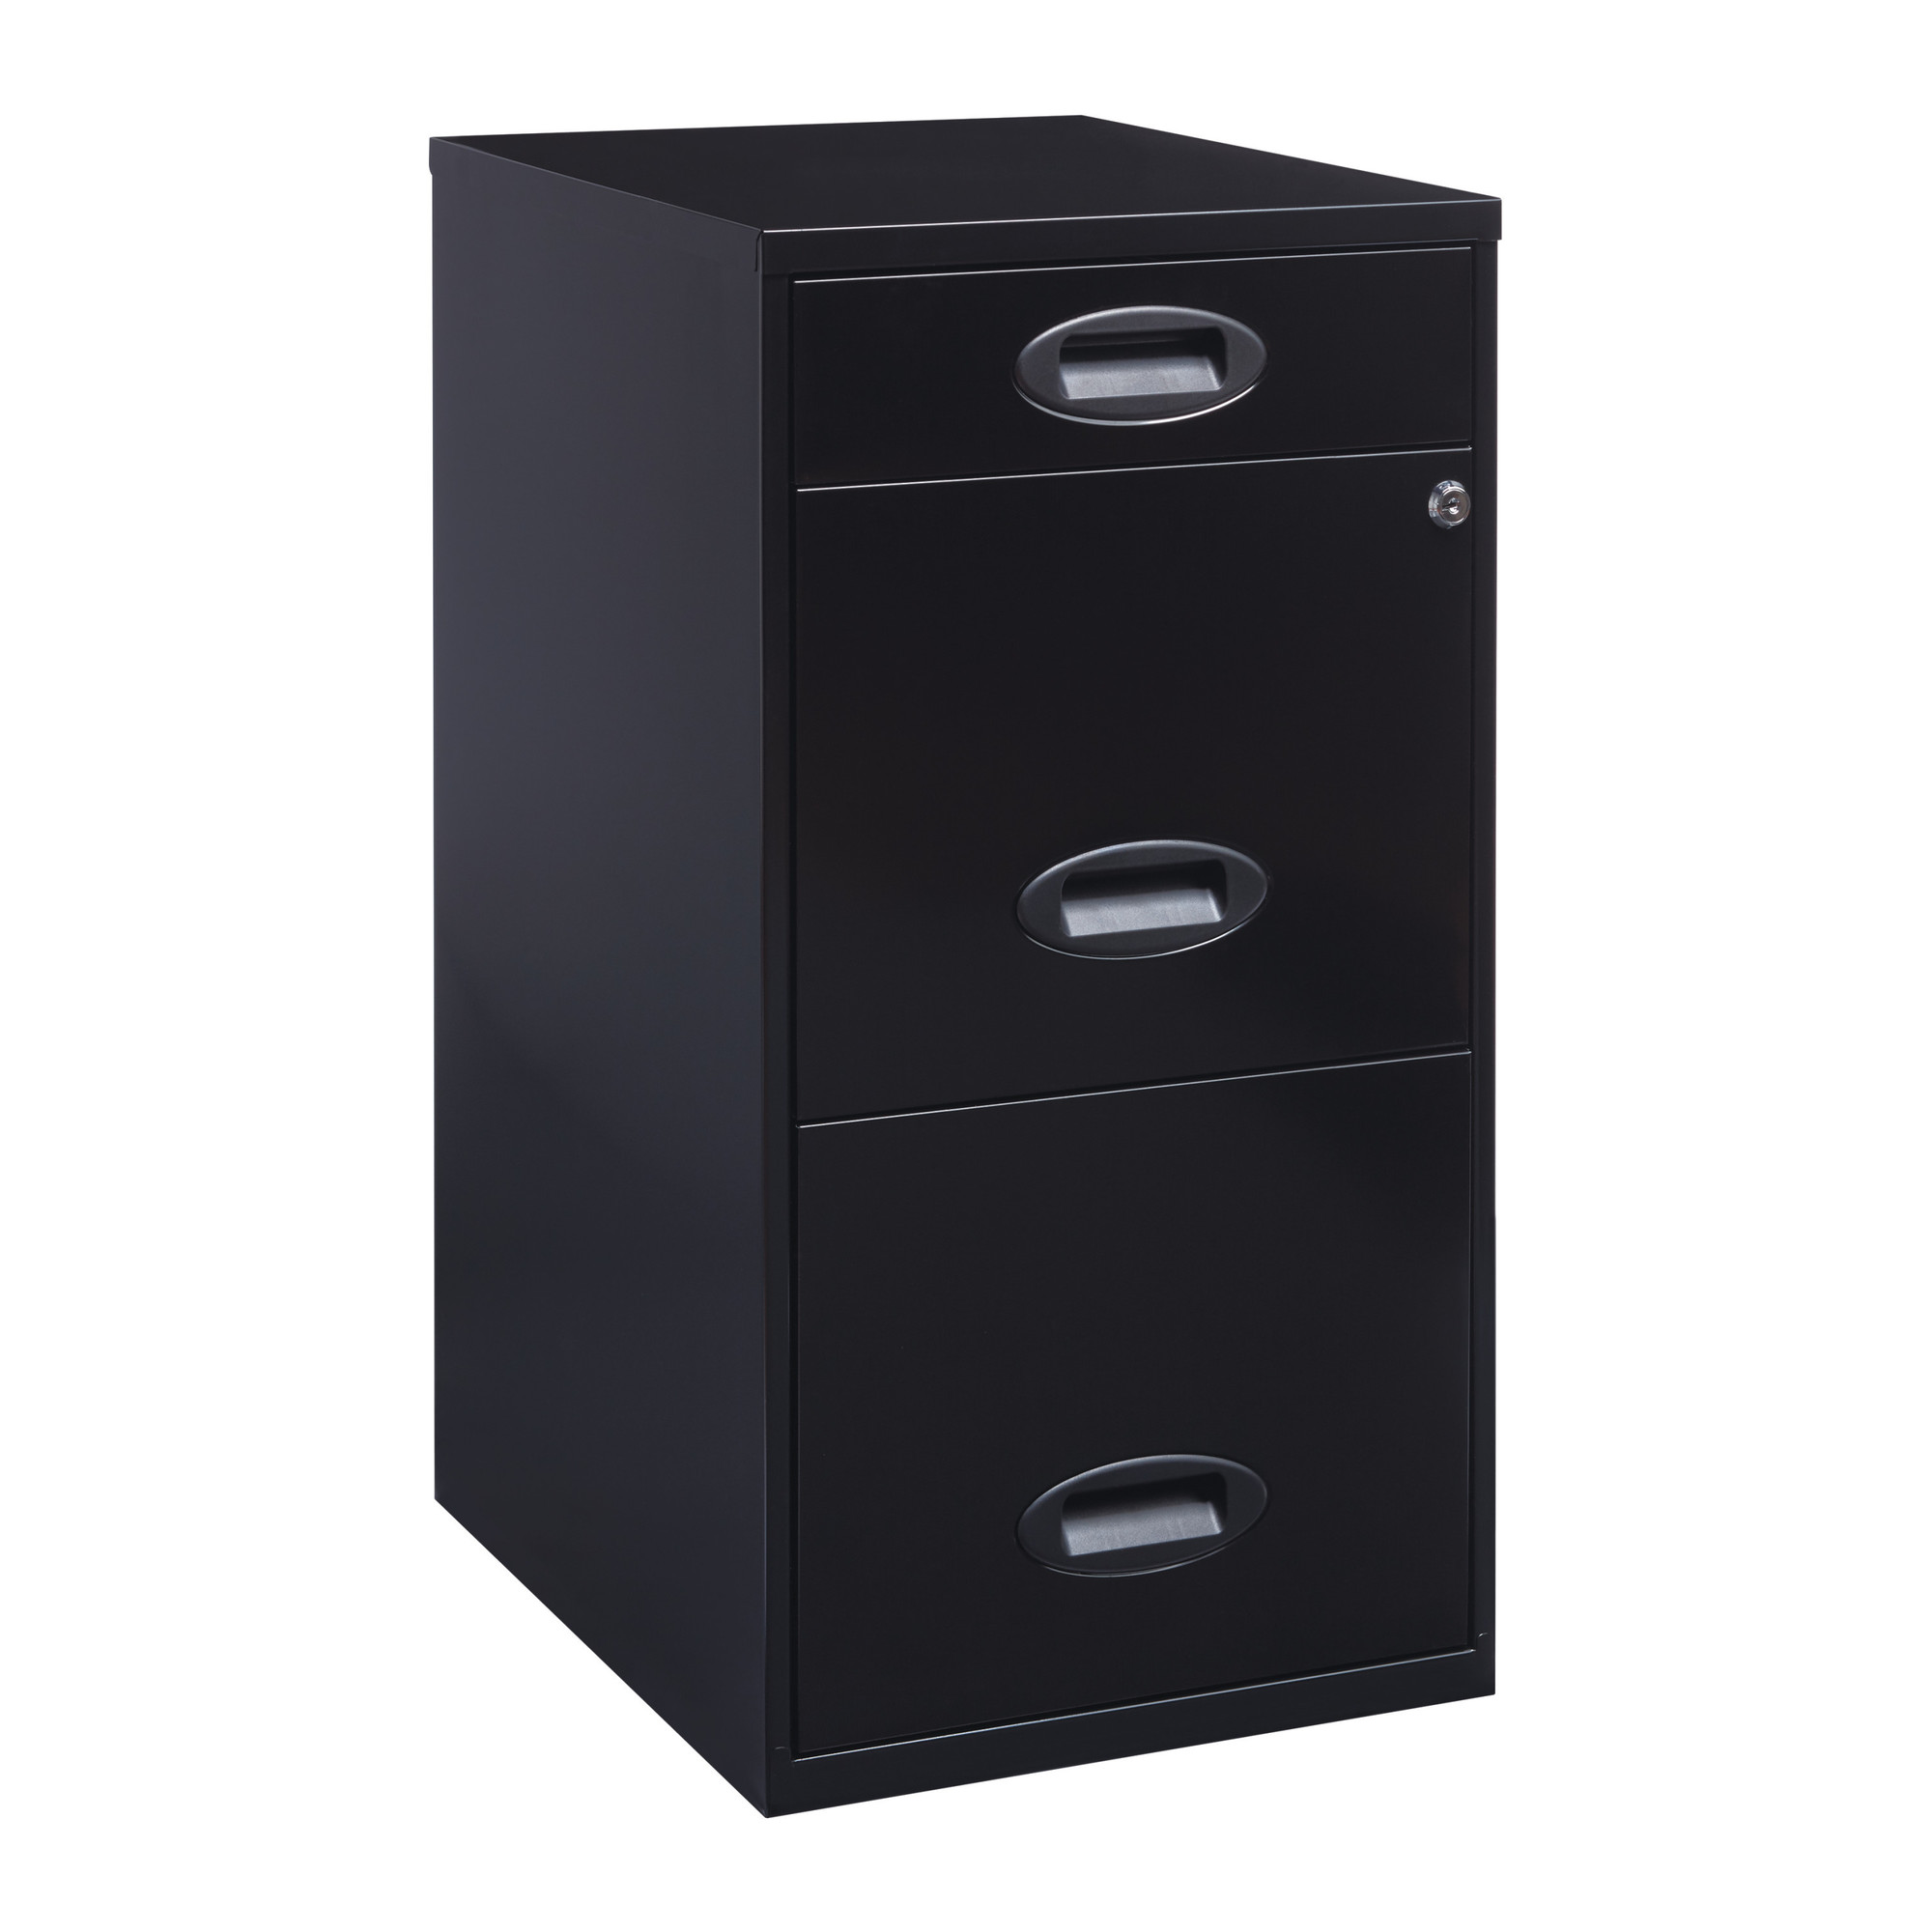 Hirsh Industries, 3 Drawer Letter Width File Cabinet, Pencil Drawer, Width 14.25 in, Depth 18 in, Height 27.32 in, Model 21617